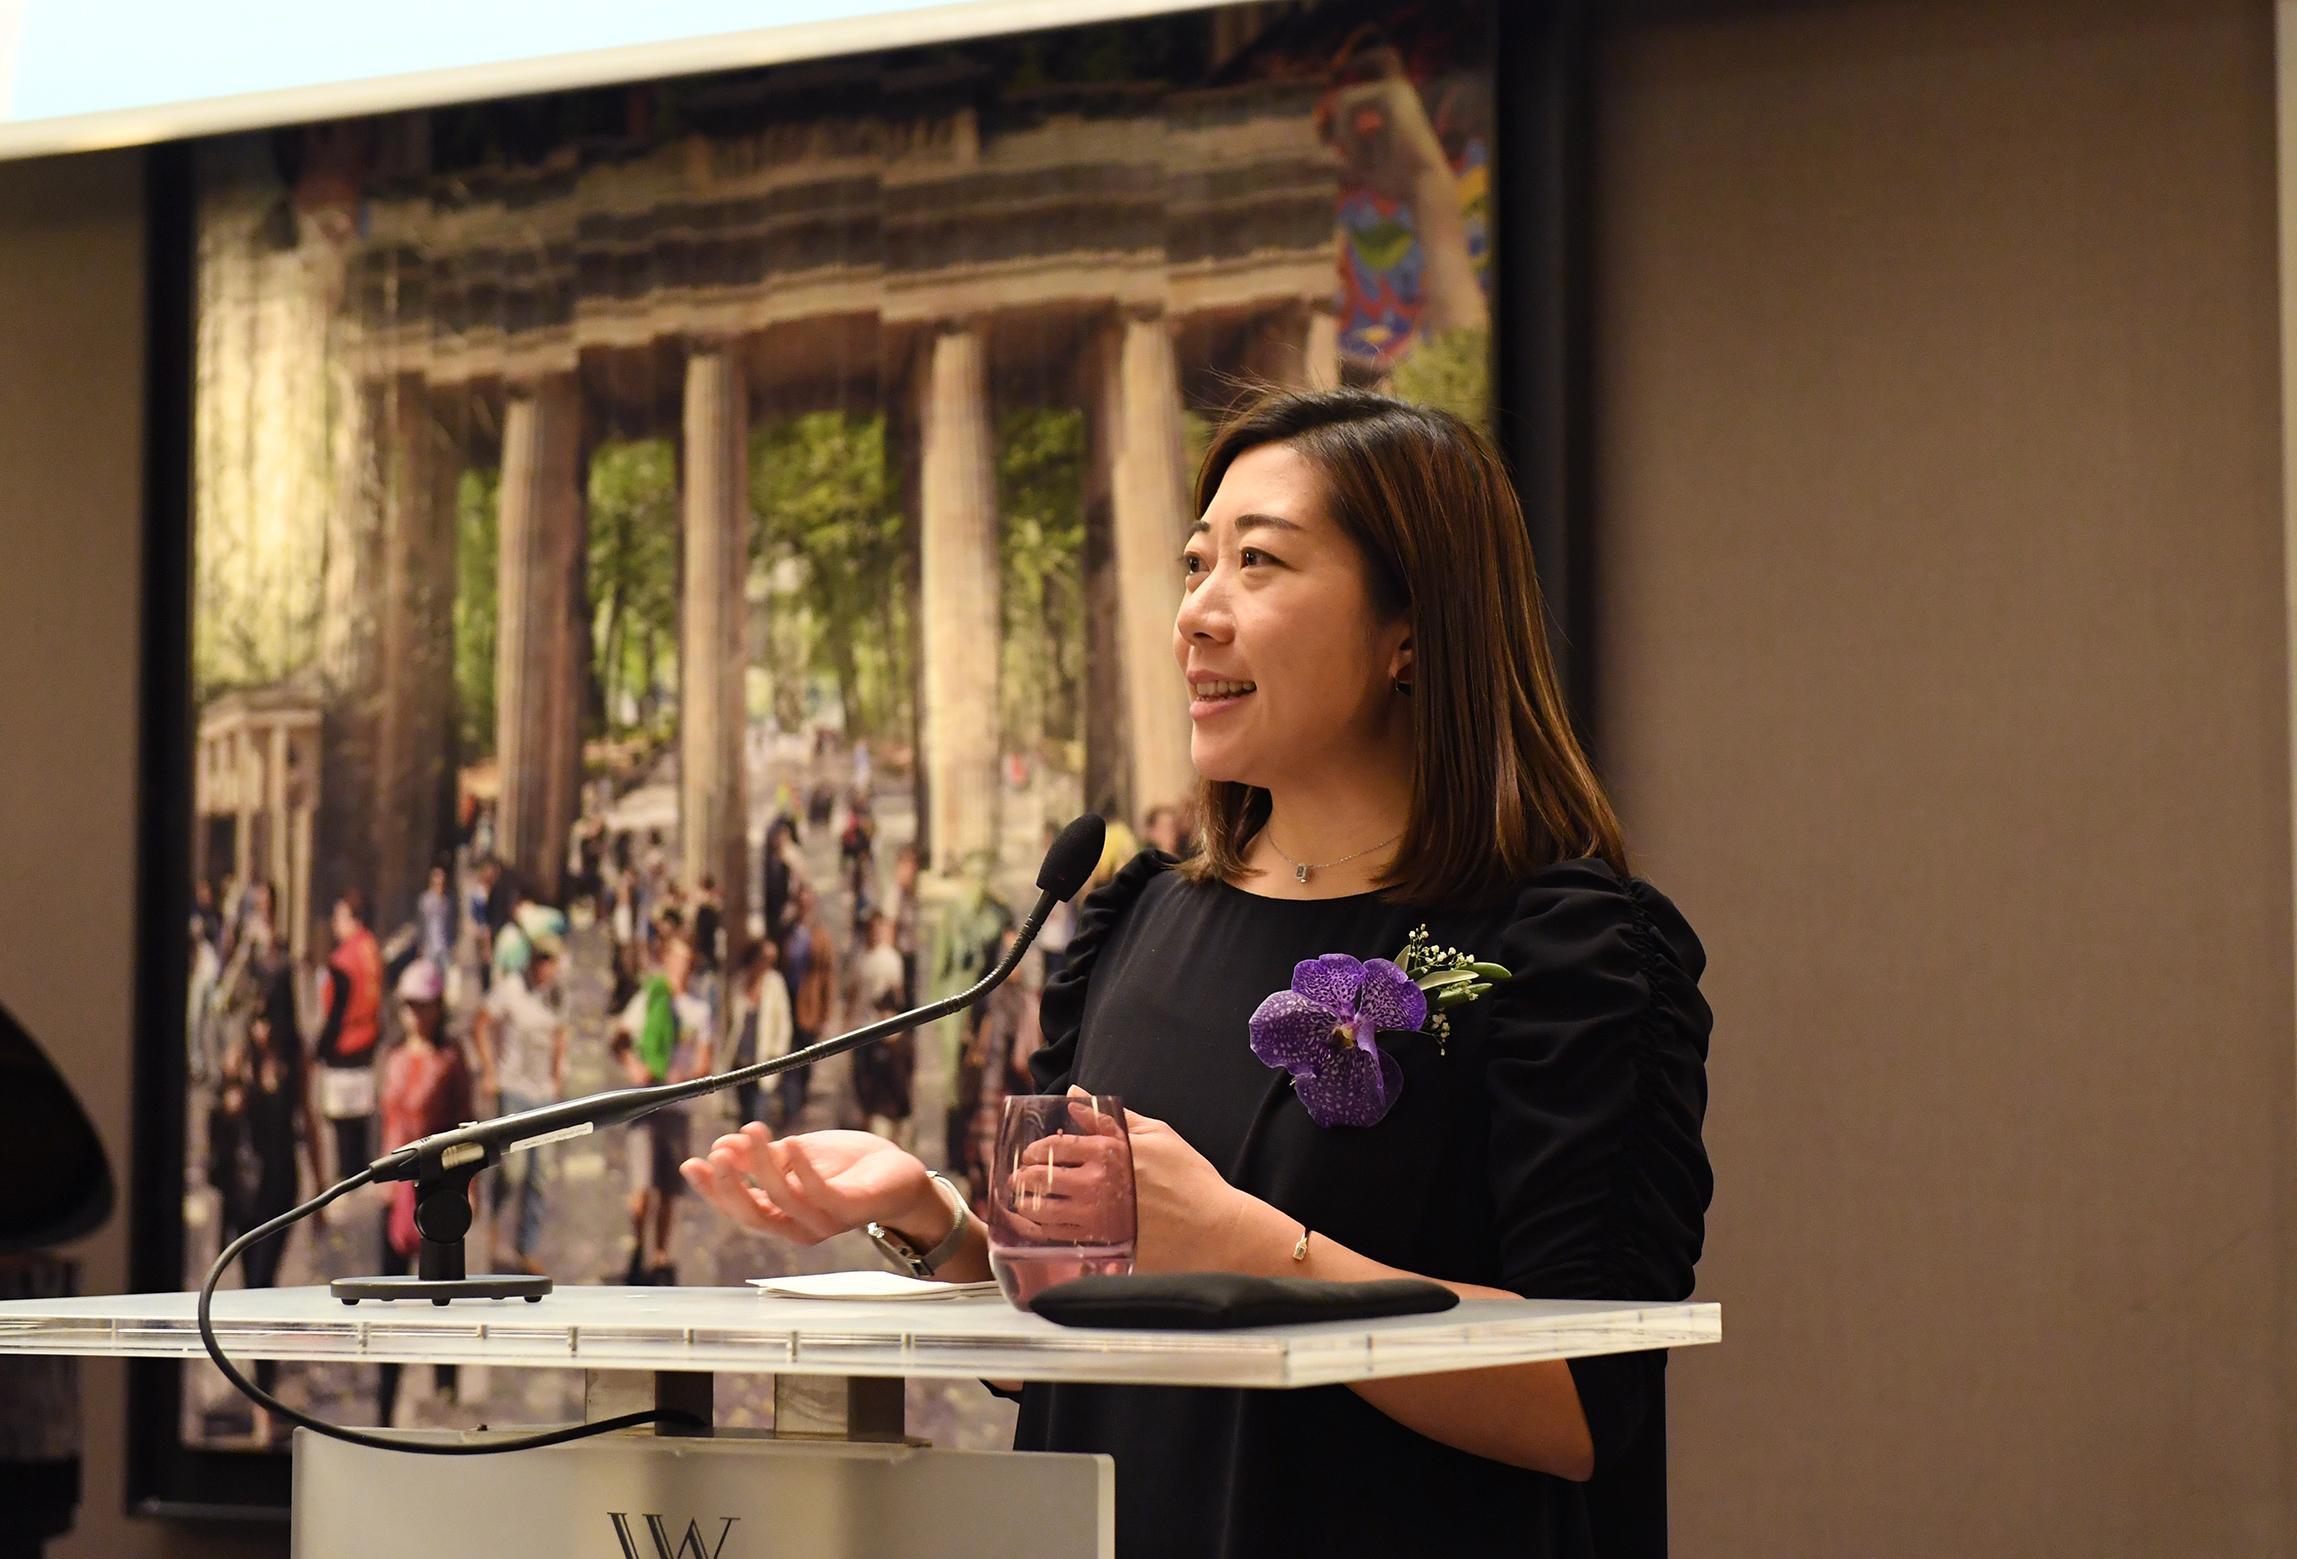 The Director of HKETO Berlin, Ms Jenny Szeto, delivers her welcome remarks at the Chinese New Year reception held in Berlin, Germany, on February 13 (Berlin time).